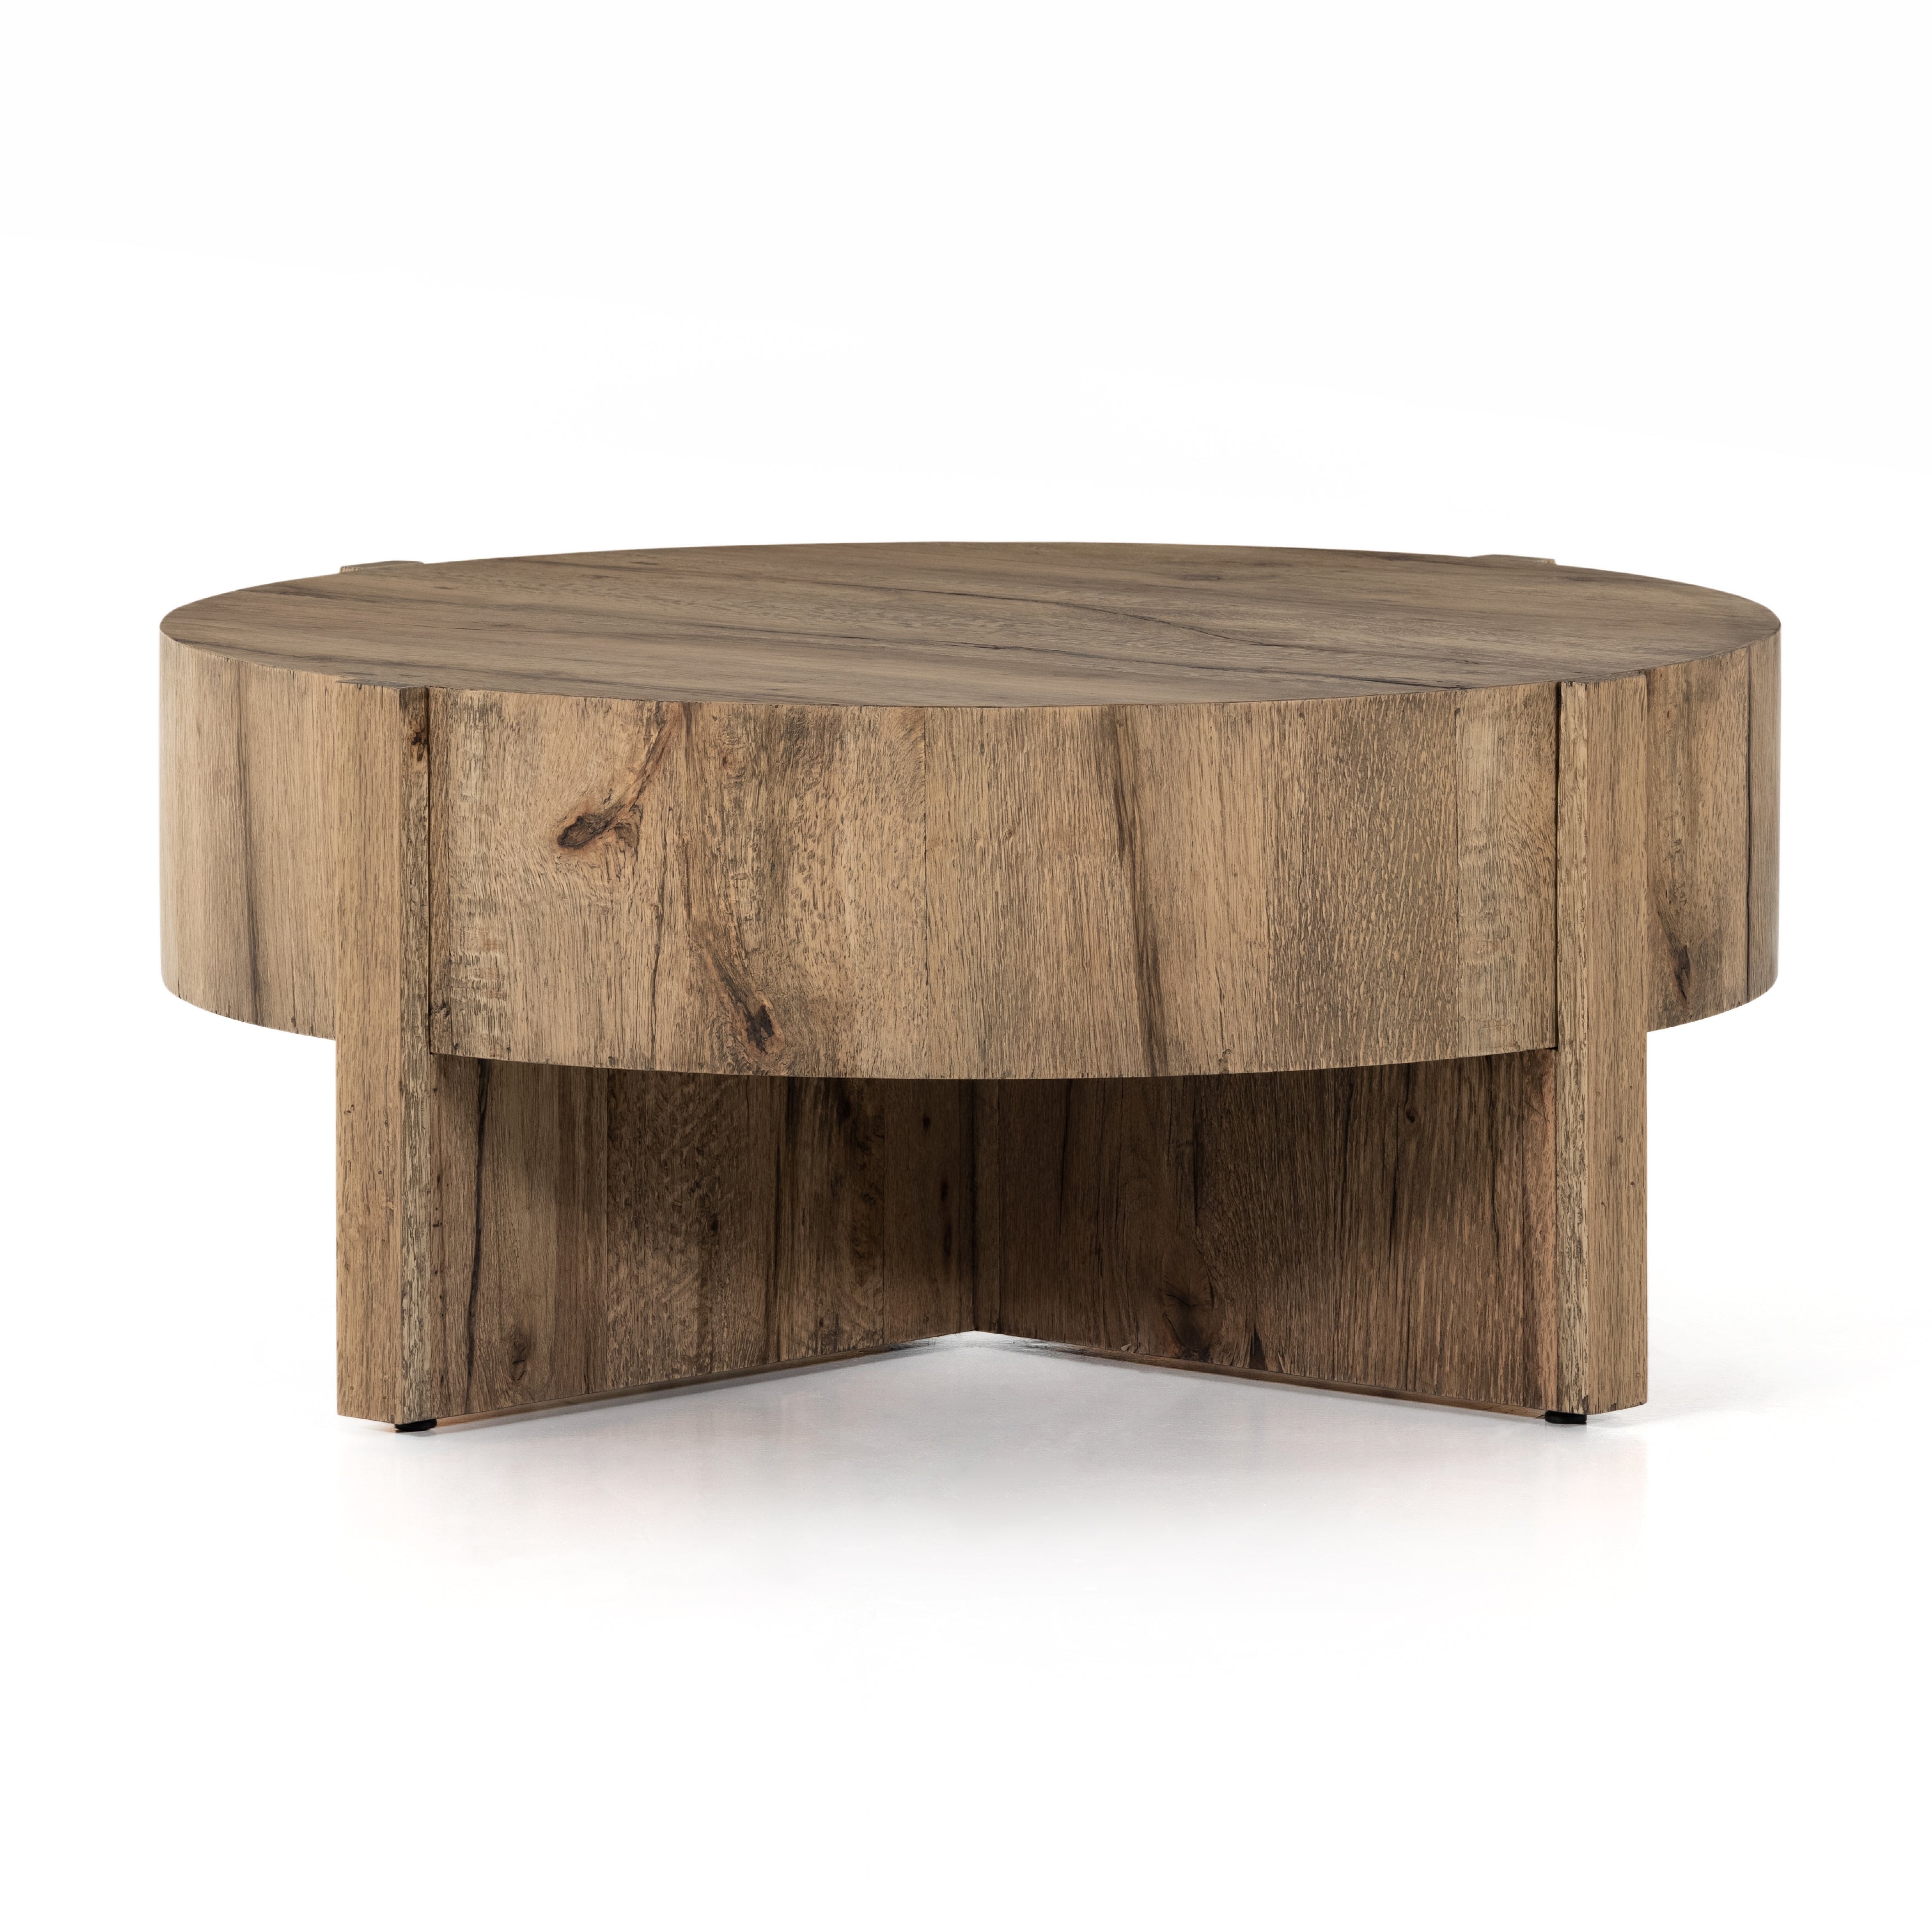 An organic-spirited statement piece. A drum-style coffee table of character-rich oak and veneers rests within a sculptural cradle base of matching rustic oak with beautiful highs and lows. Amethyst Home provides interior design, new construction, custom furniture, and area rugs in the Des Moines metro area.